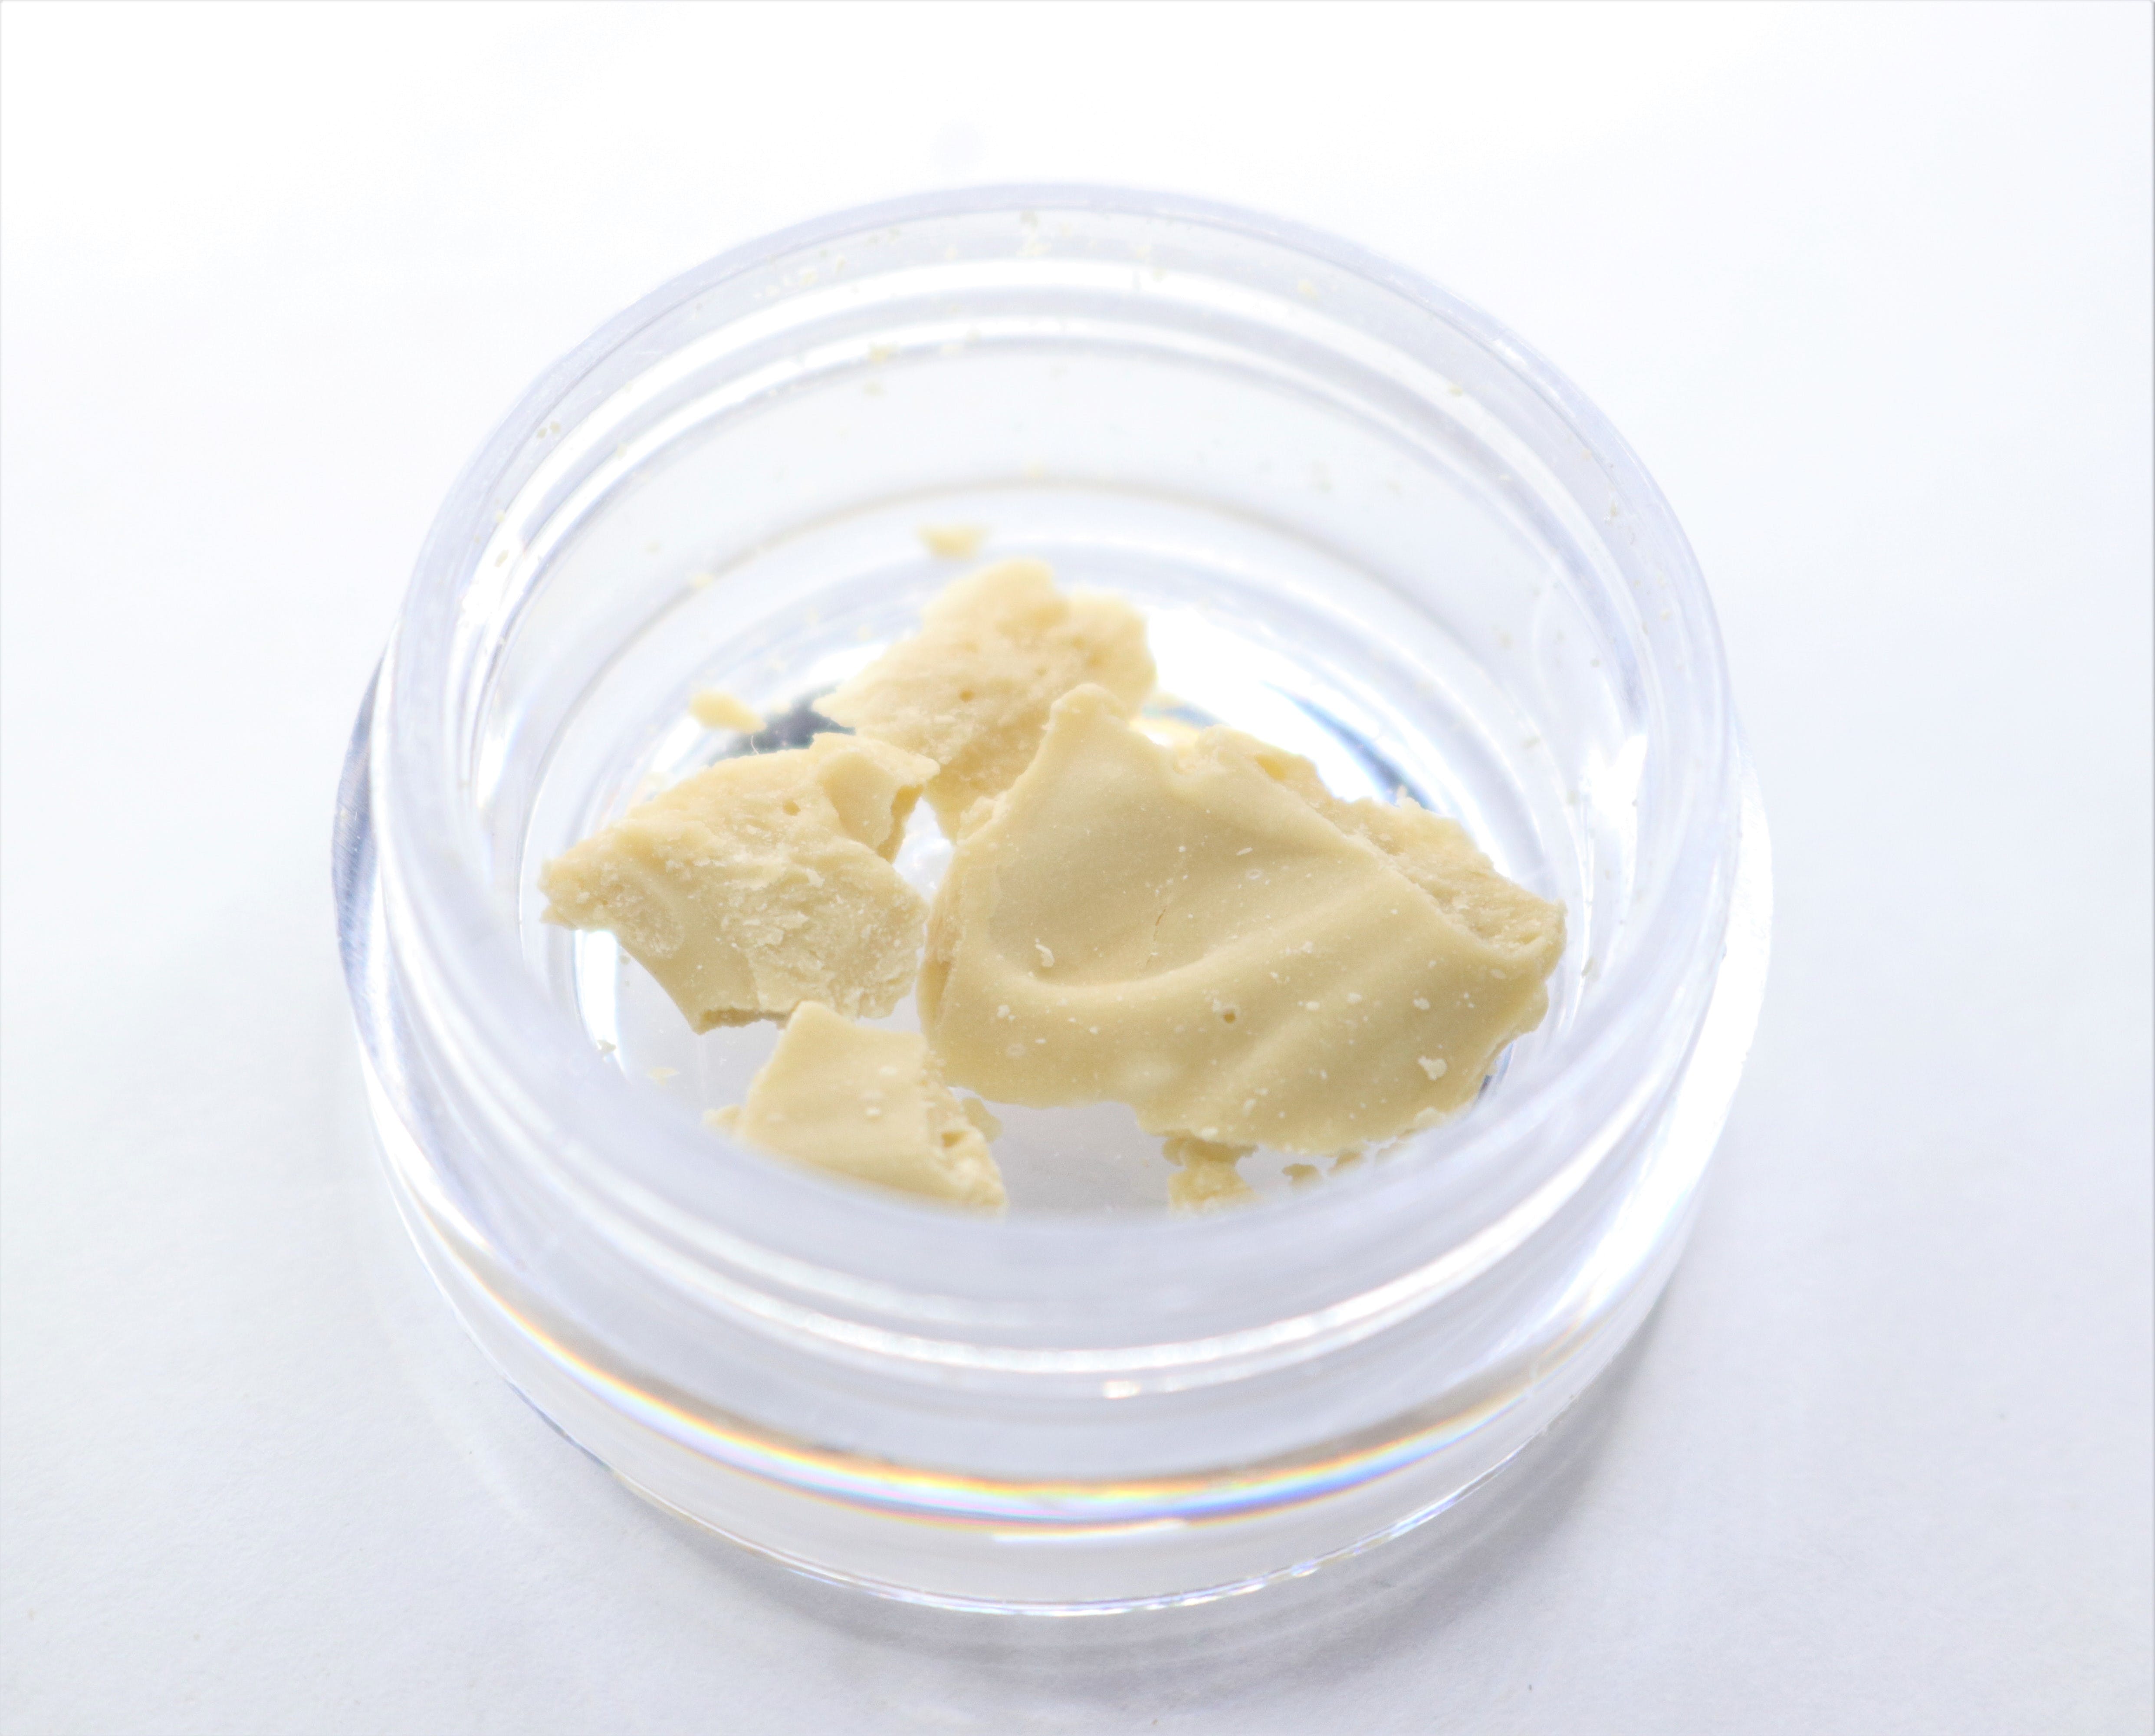 concentrate-cec-solventless-hash-oil-raw-rosin